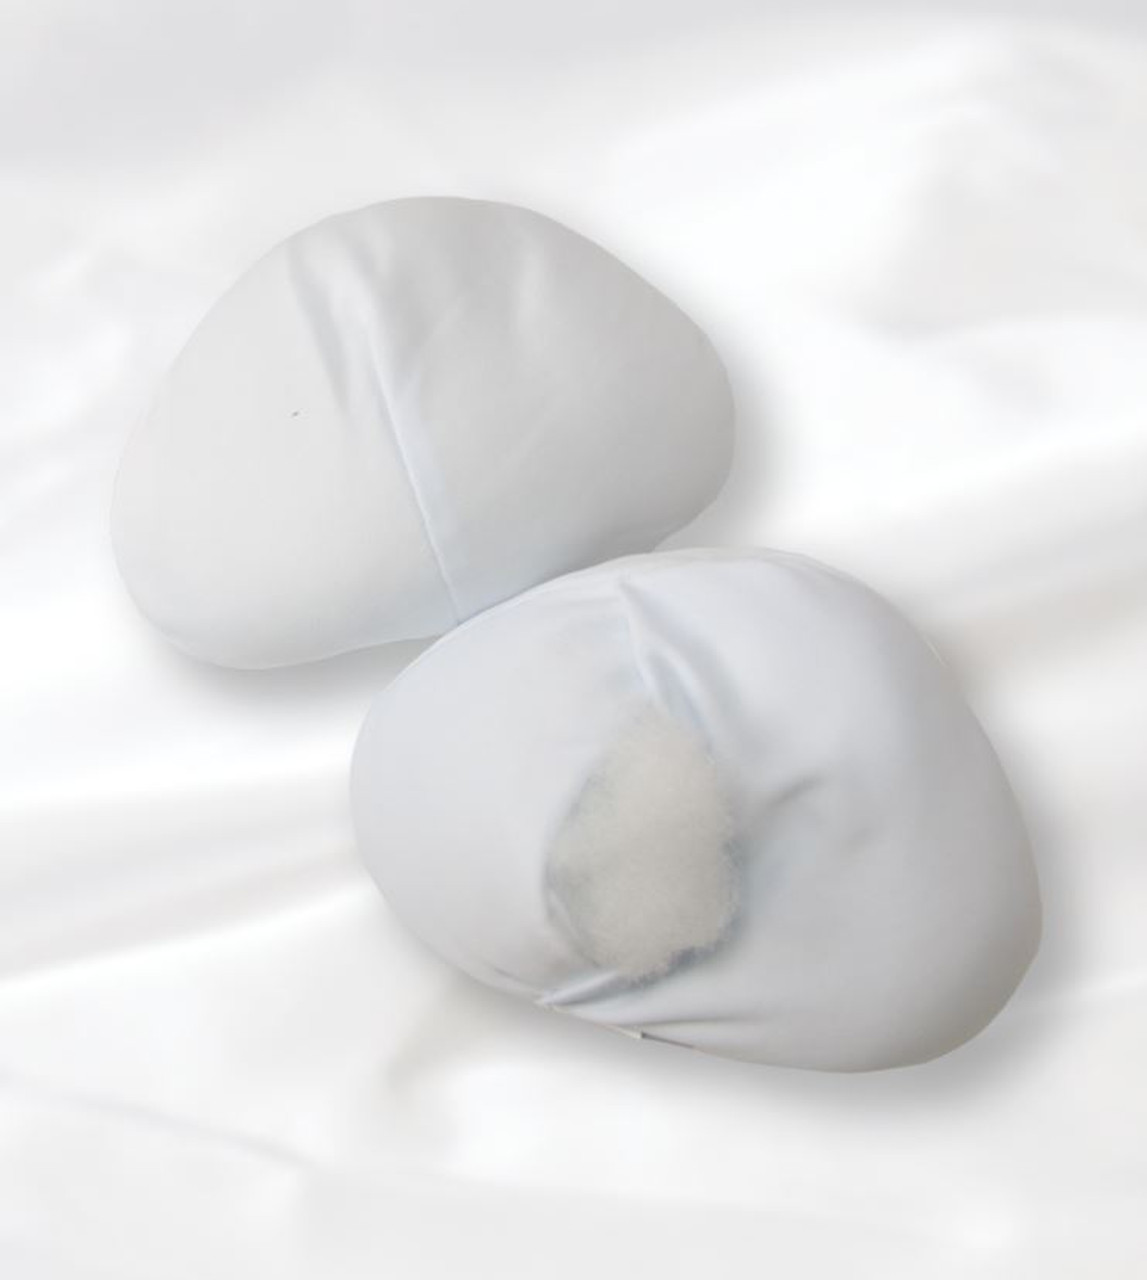 Mastectomy Lumpectomy Fiberfill Puffs for Camisoles and Pocket Bra